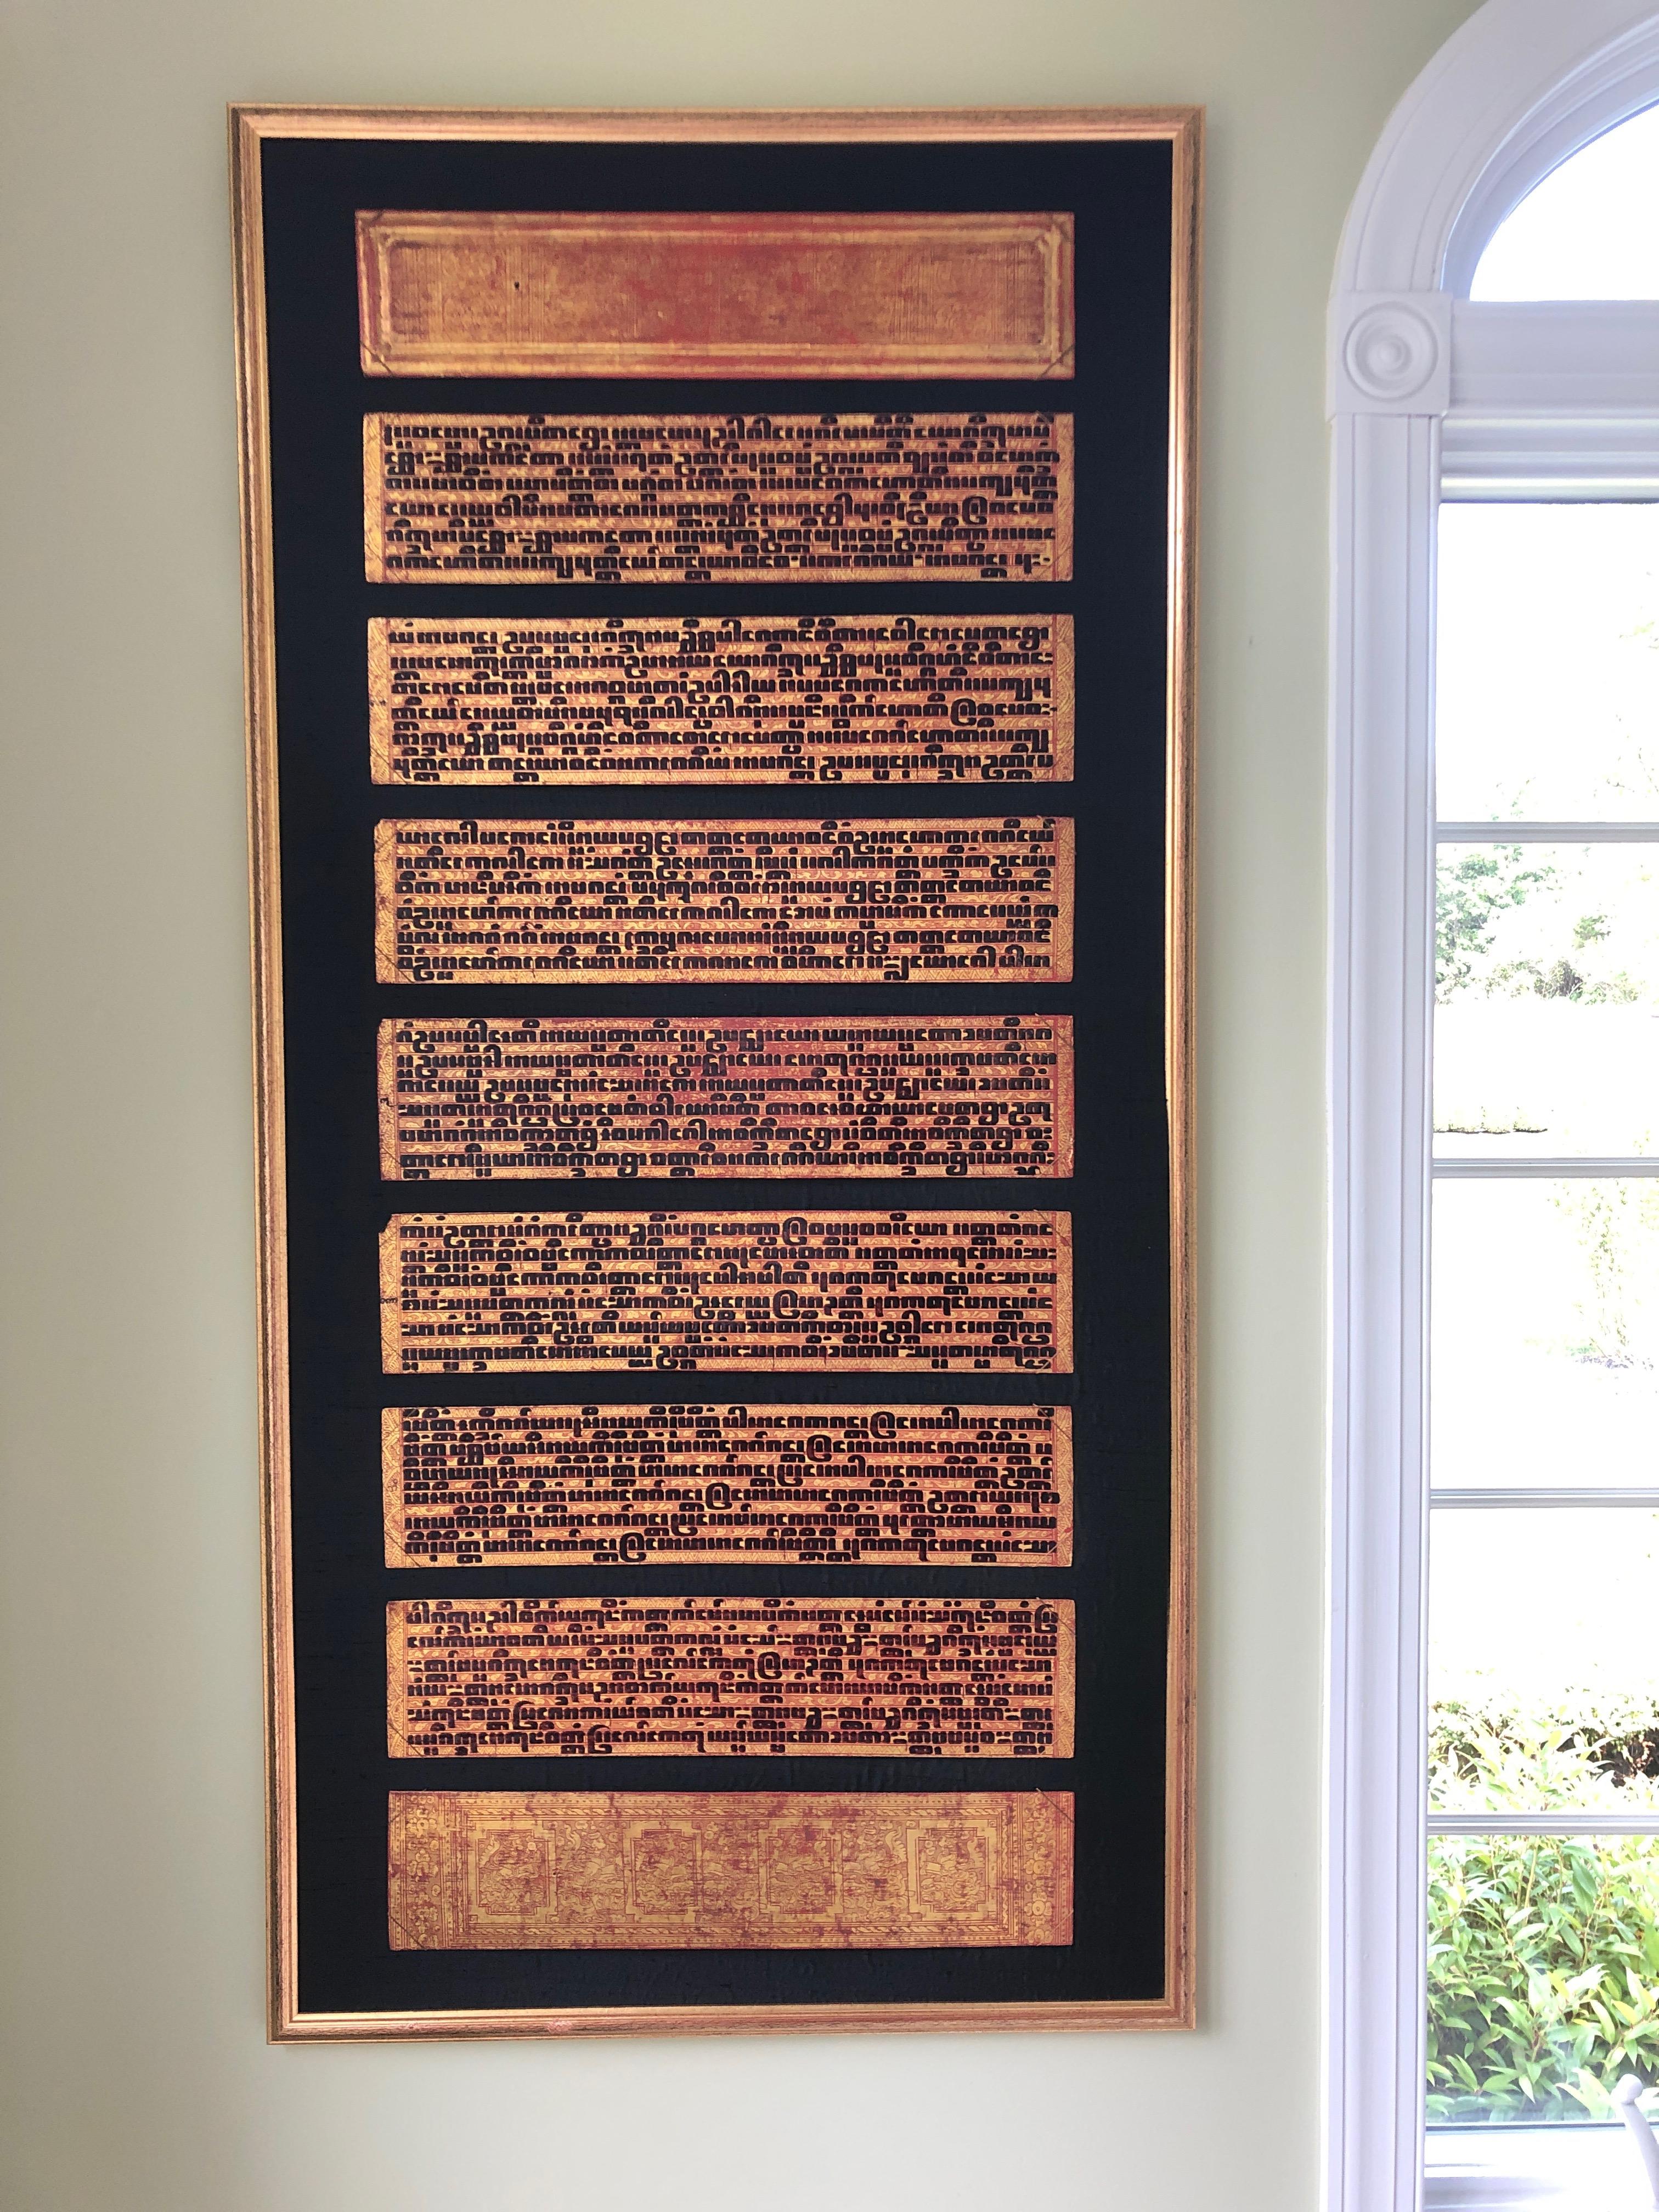 Stunning pair of large framed art that displays the intricate laquer panels from an antique Burmese bible called the Kamawa-sa, a religious text from the Pali Vinaya. Palm leaf and paper manuscripts of Myanmar, this is by far the most ornate